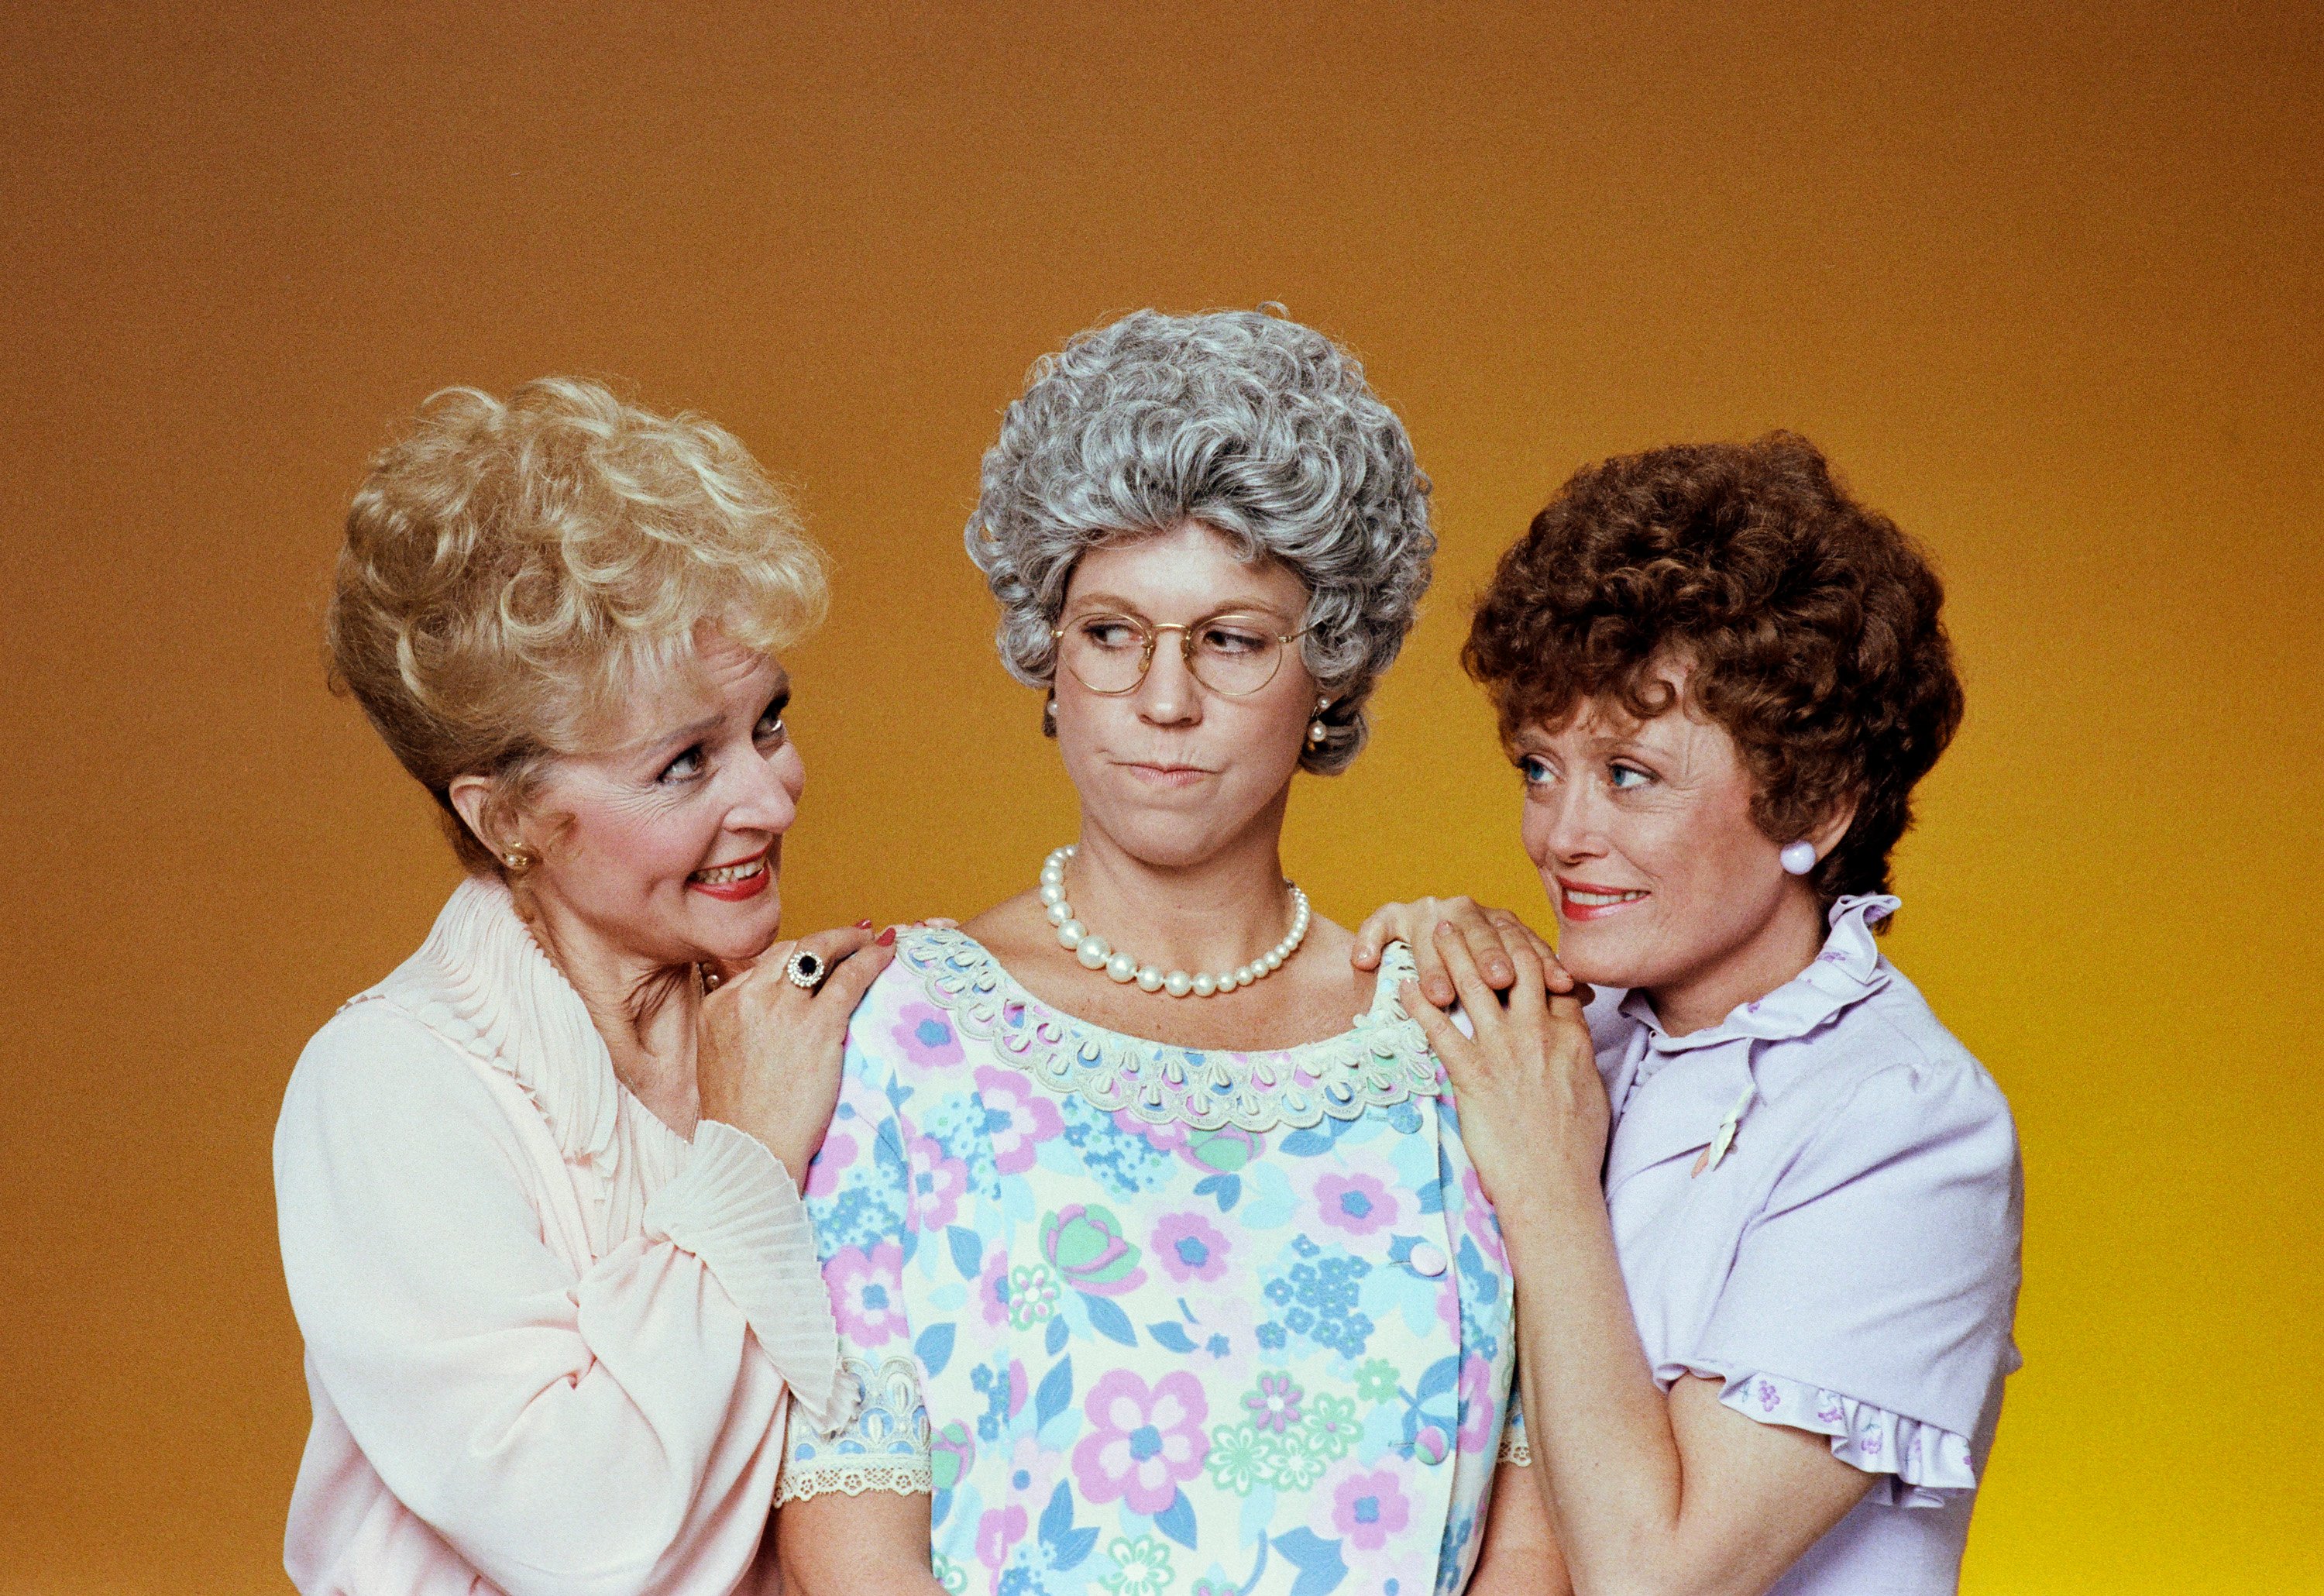 Betty White, Vicki Lawrence, and Rue McClanahan dressed as their characters from the sitcom Mama's Family for a promotional photoshoot.